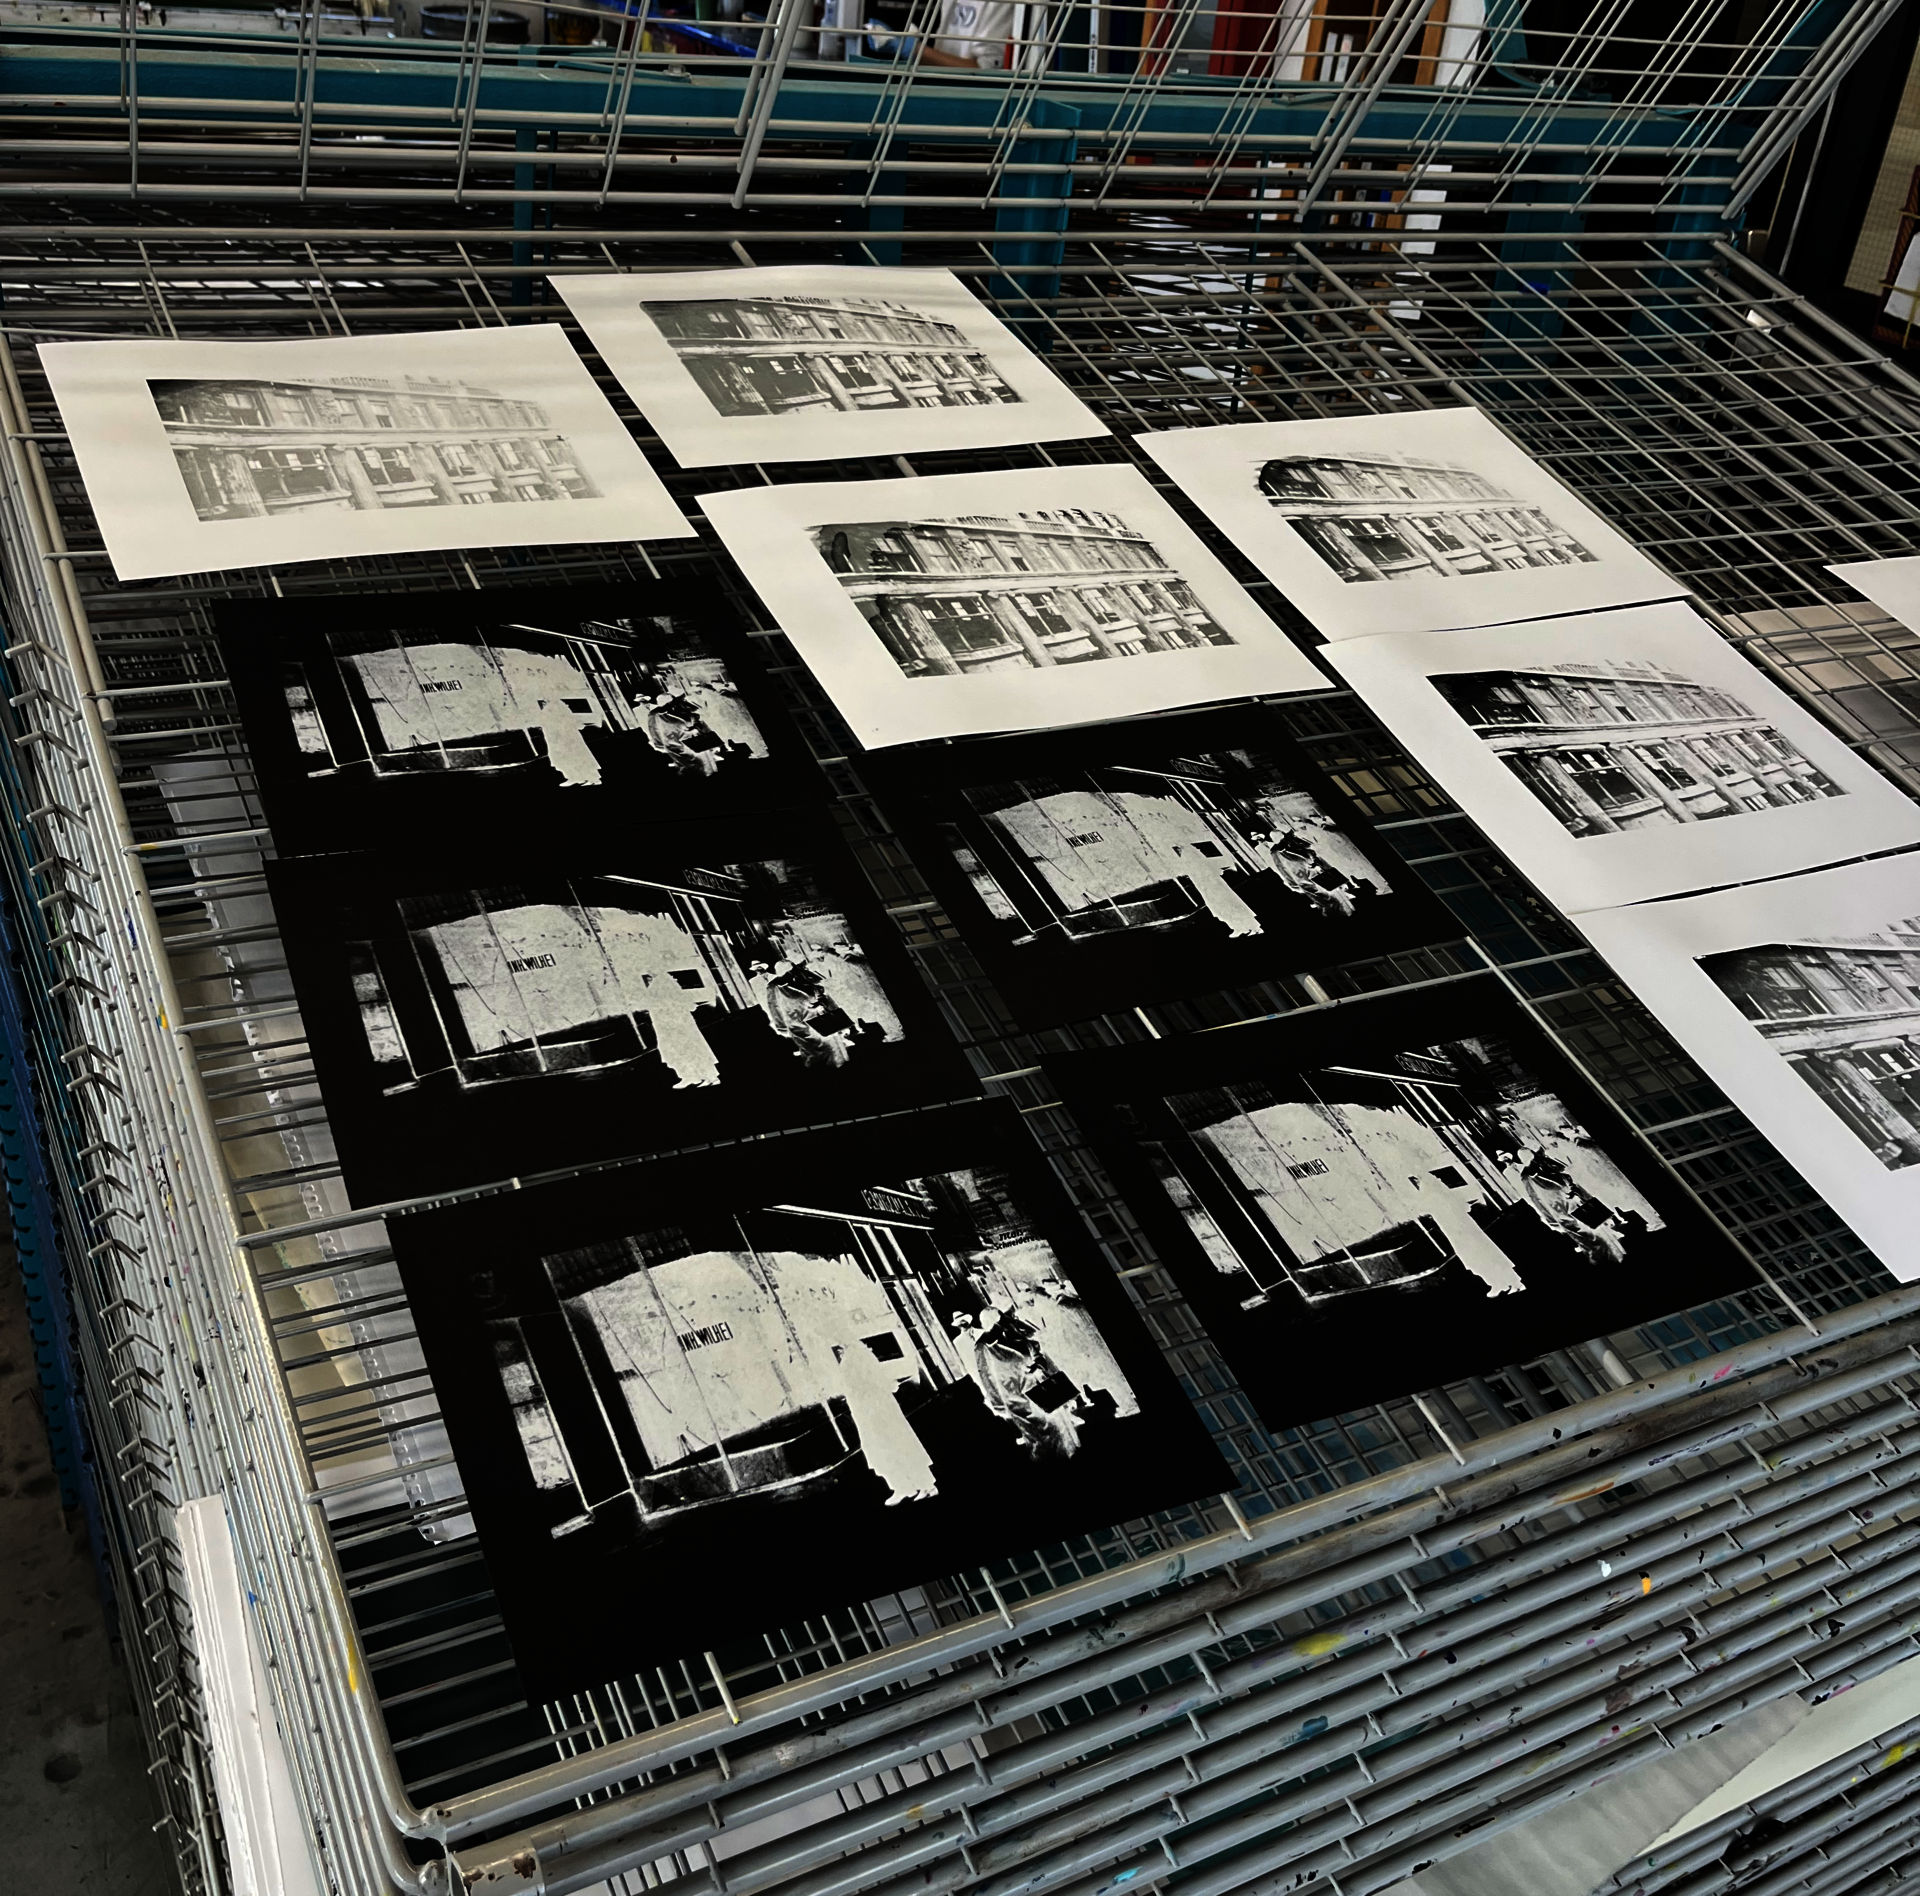 Screen prints of scenes from Kristallnacht